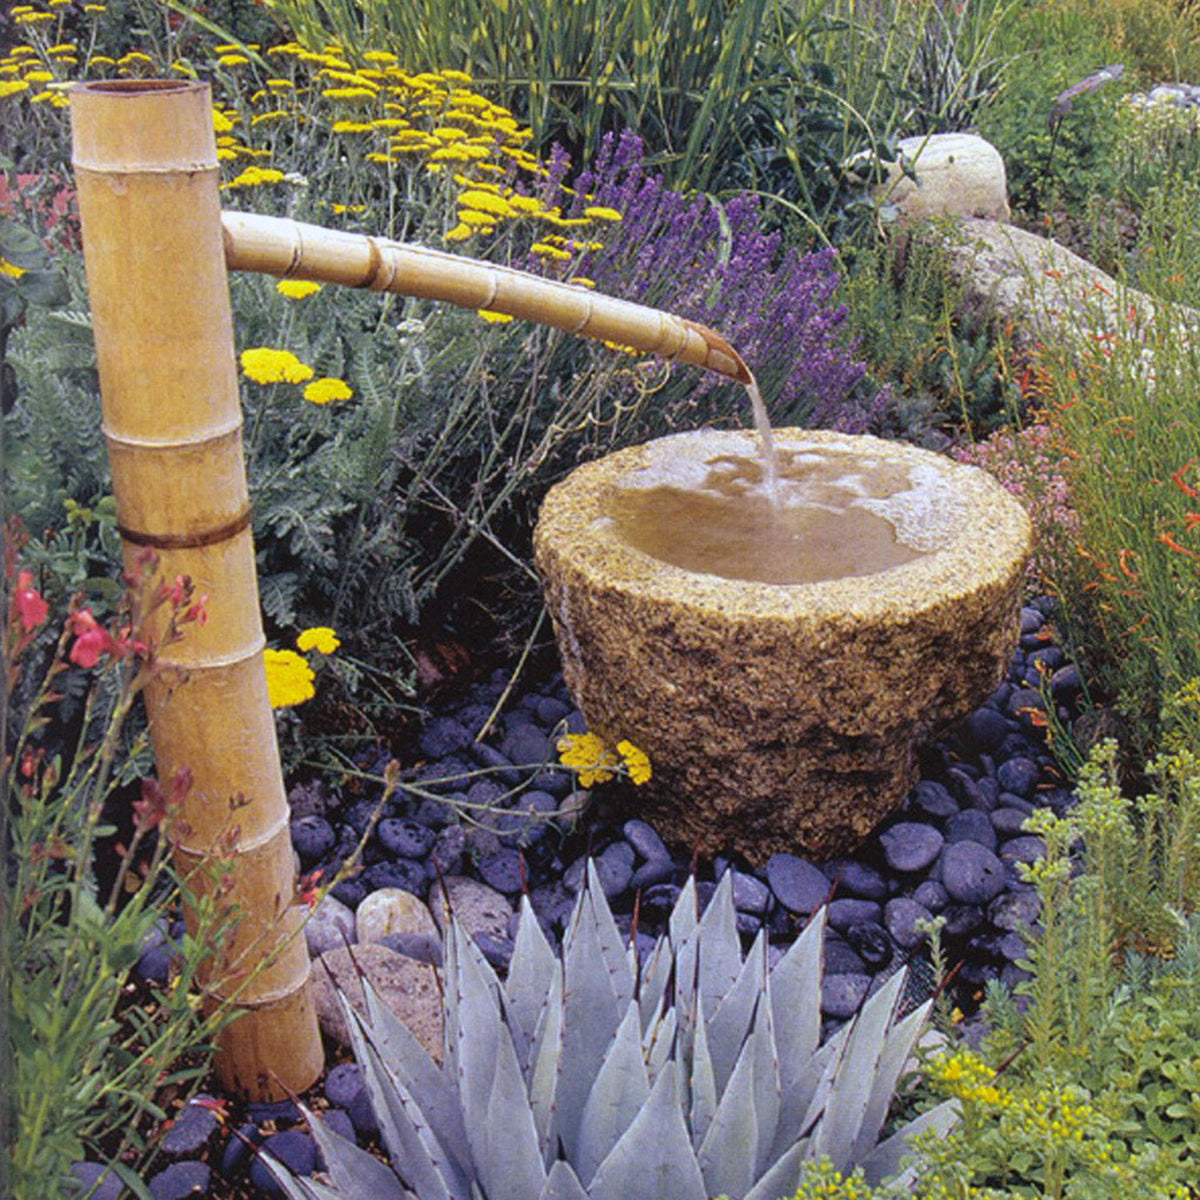 Bamboo water spout for use with basin-style fountains. image 1 of 2